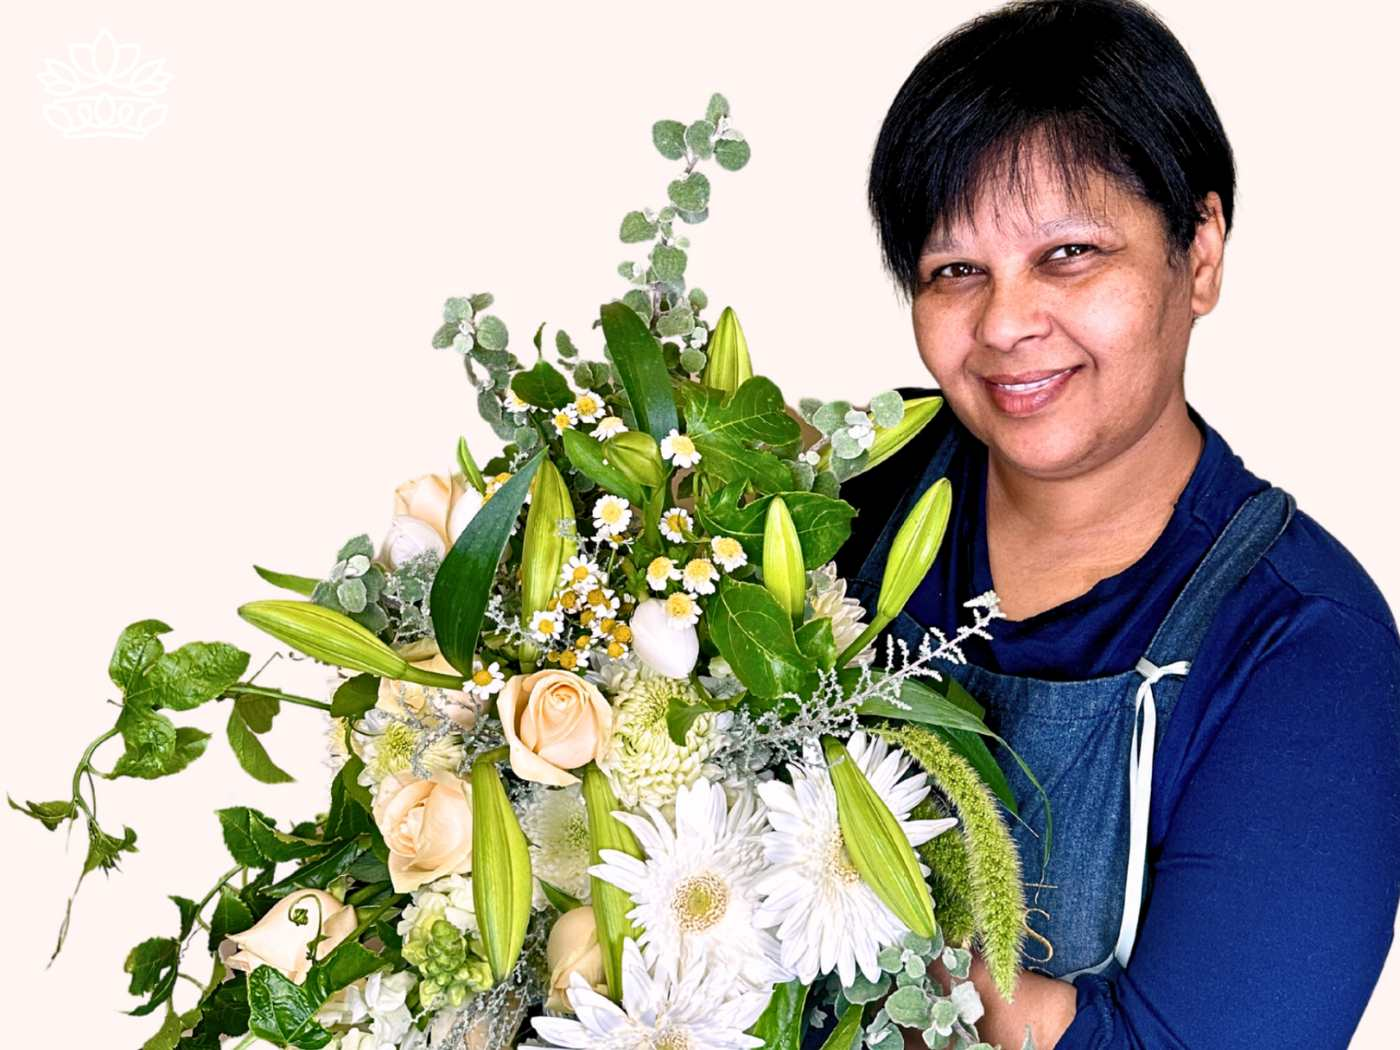 Cheerful florist holding a quality bunch of blooms from the Florist Choice Bouquets Collection, featuring cream roses, white lilies, and lush foliage. Perfect for delivering flowers that delight customers. Fabulous Flowers and Gifts.